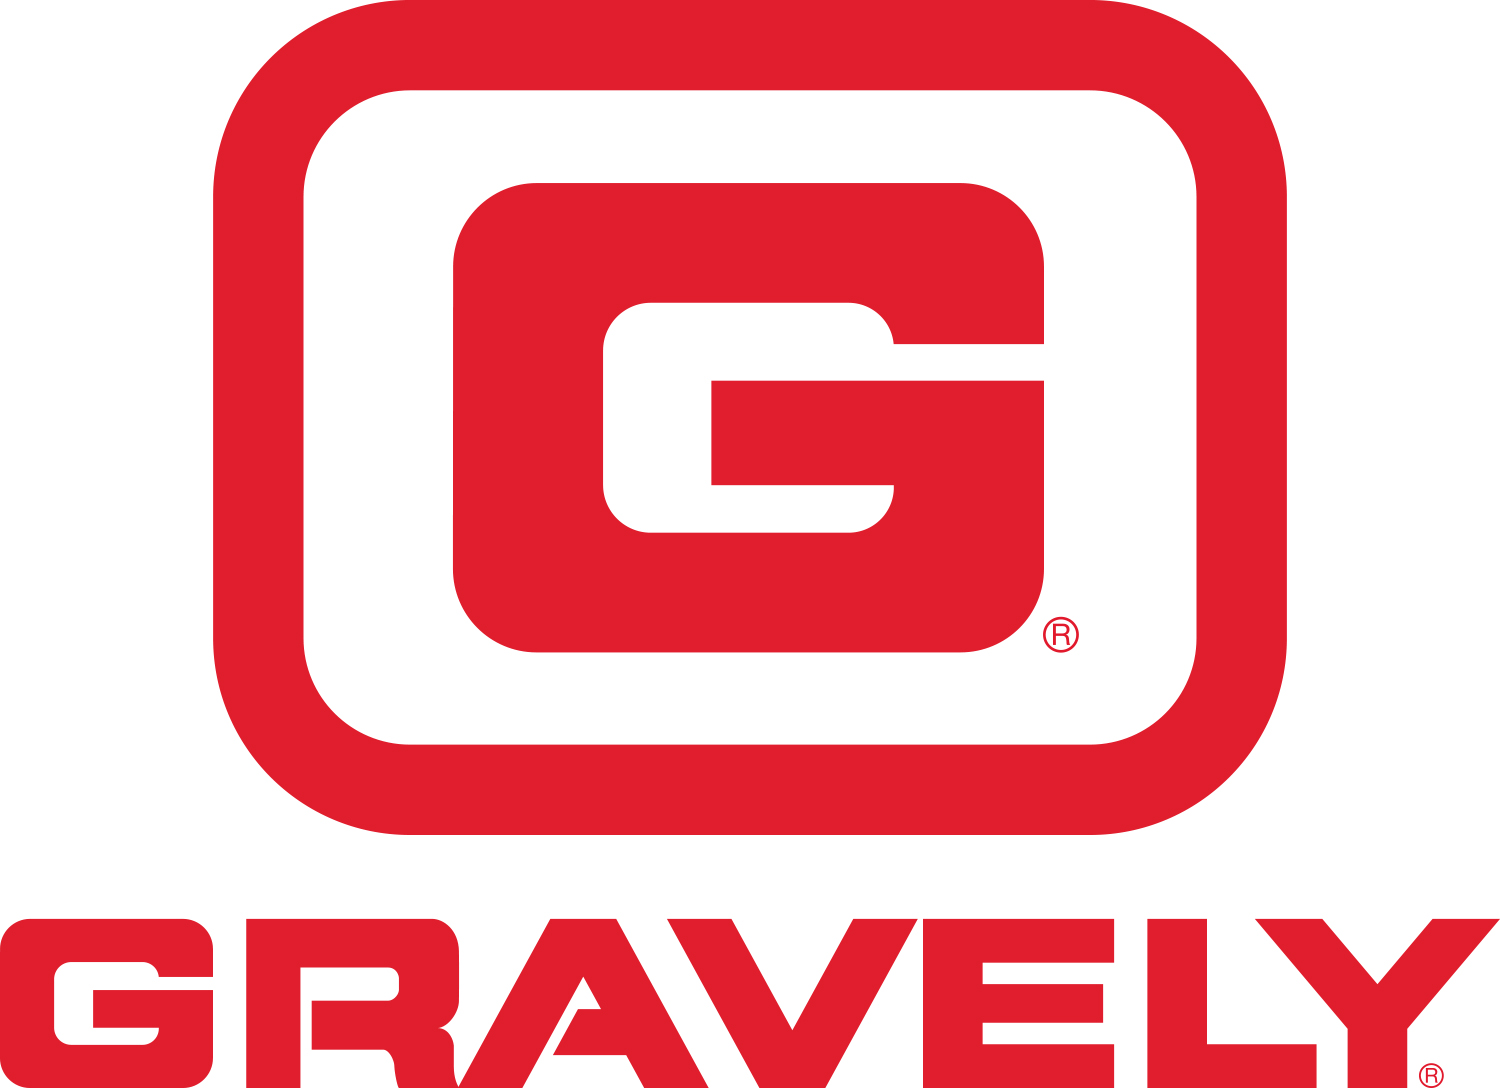 Link to Gravely website